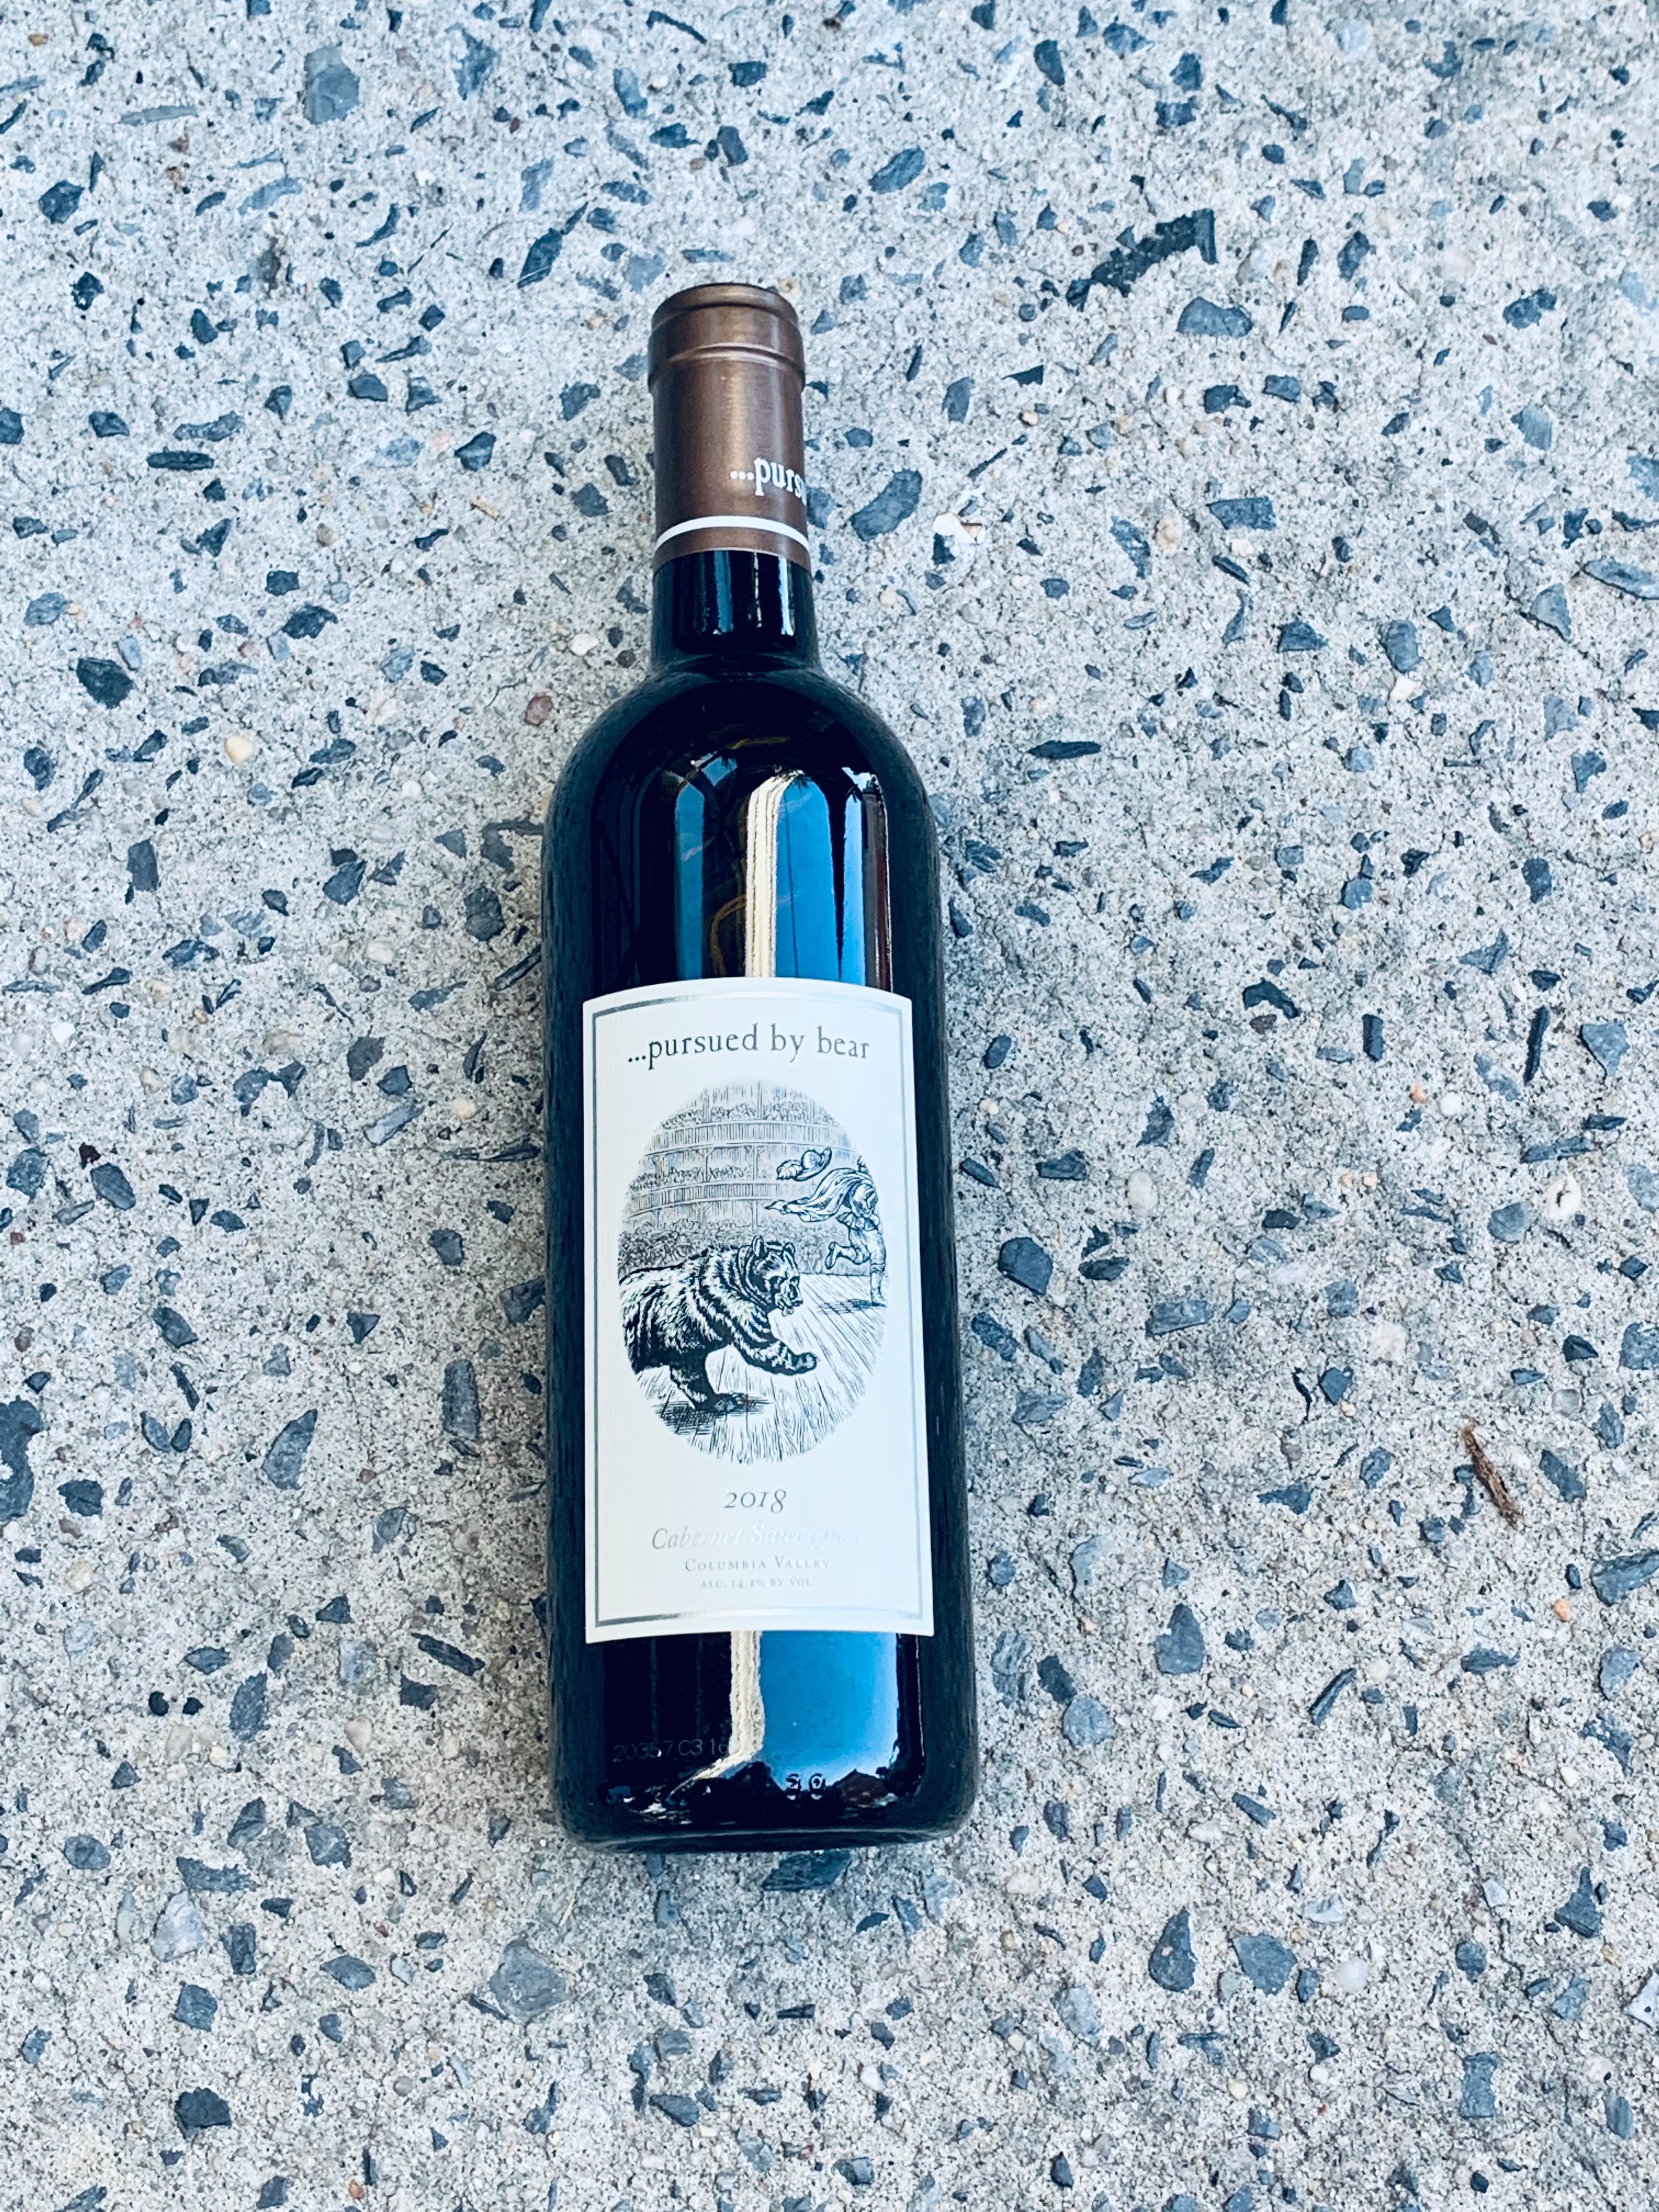 Pursued By Bear (Kyle MacLachlan) - Cabernet Sauvignon Columbia Valley 2018 750ml (14.2% ABV)